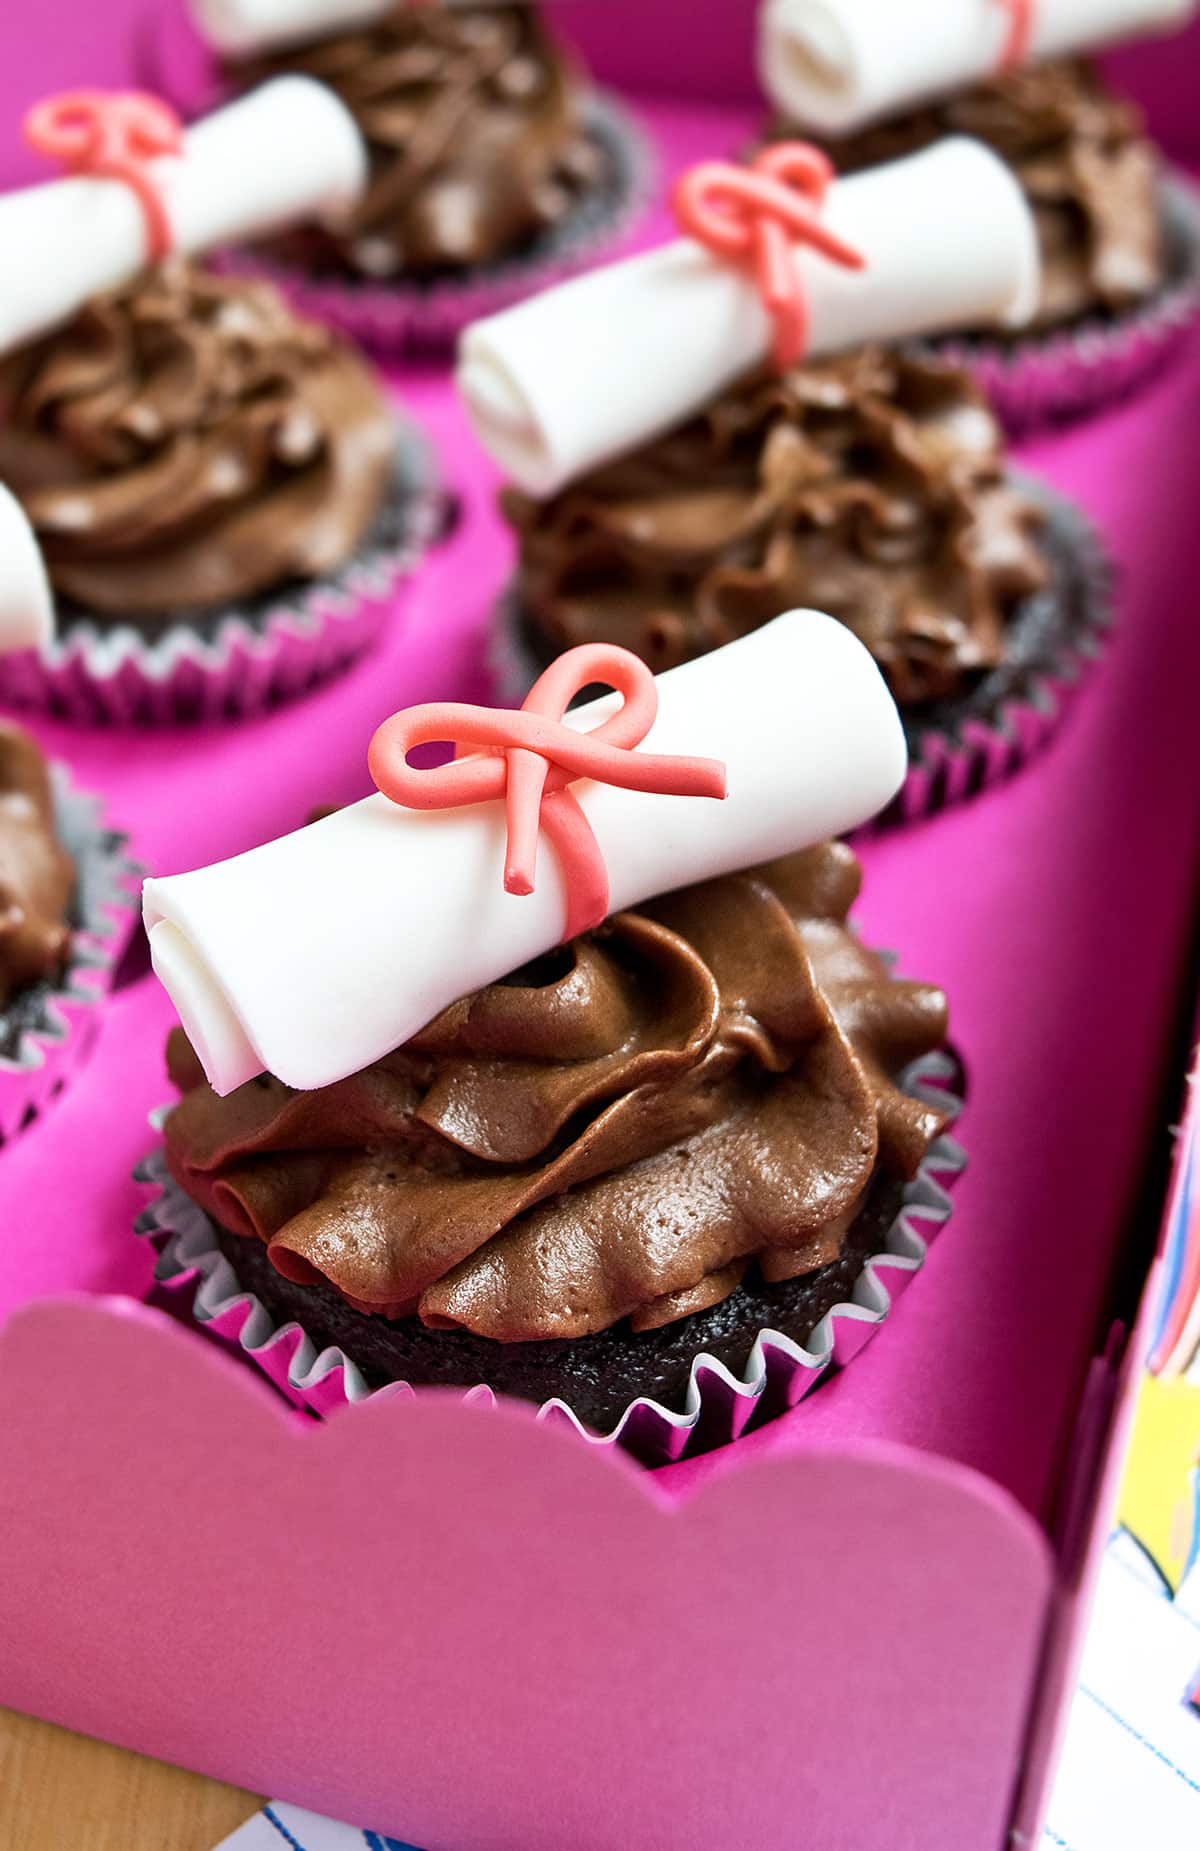 Decorated Cupcakes in a Pink Box. 